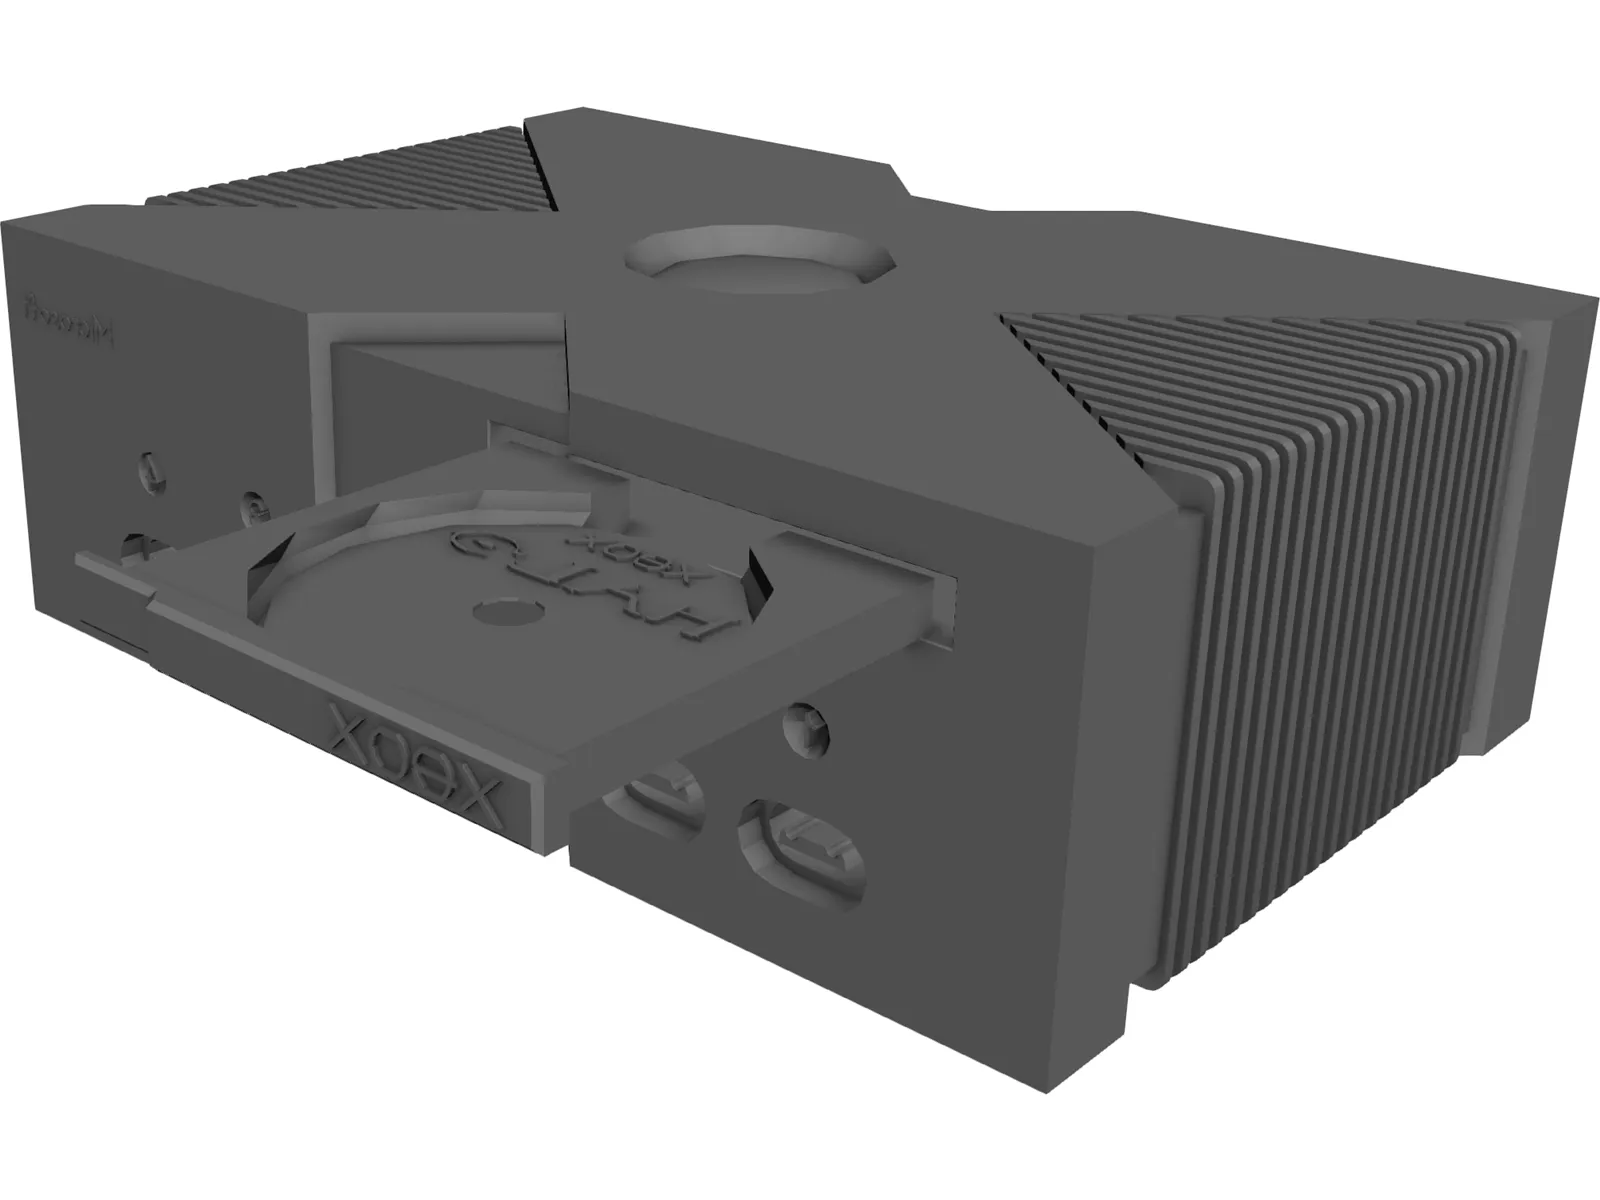 Xbox Console 3d Model 3dcadbrowser